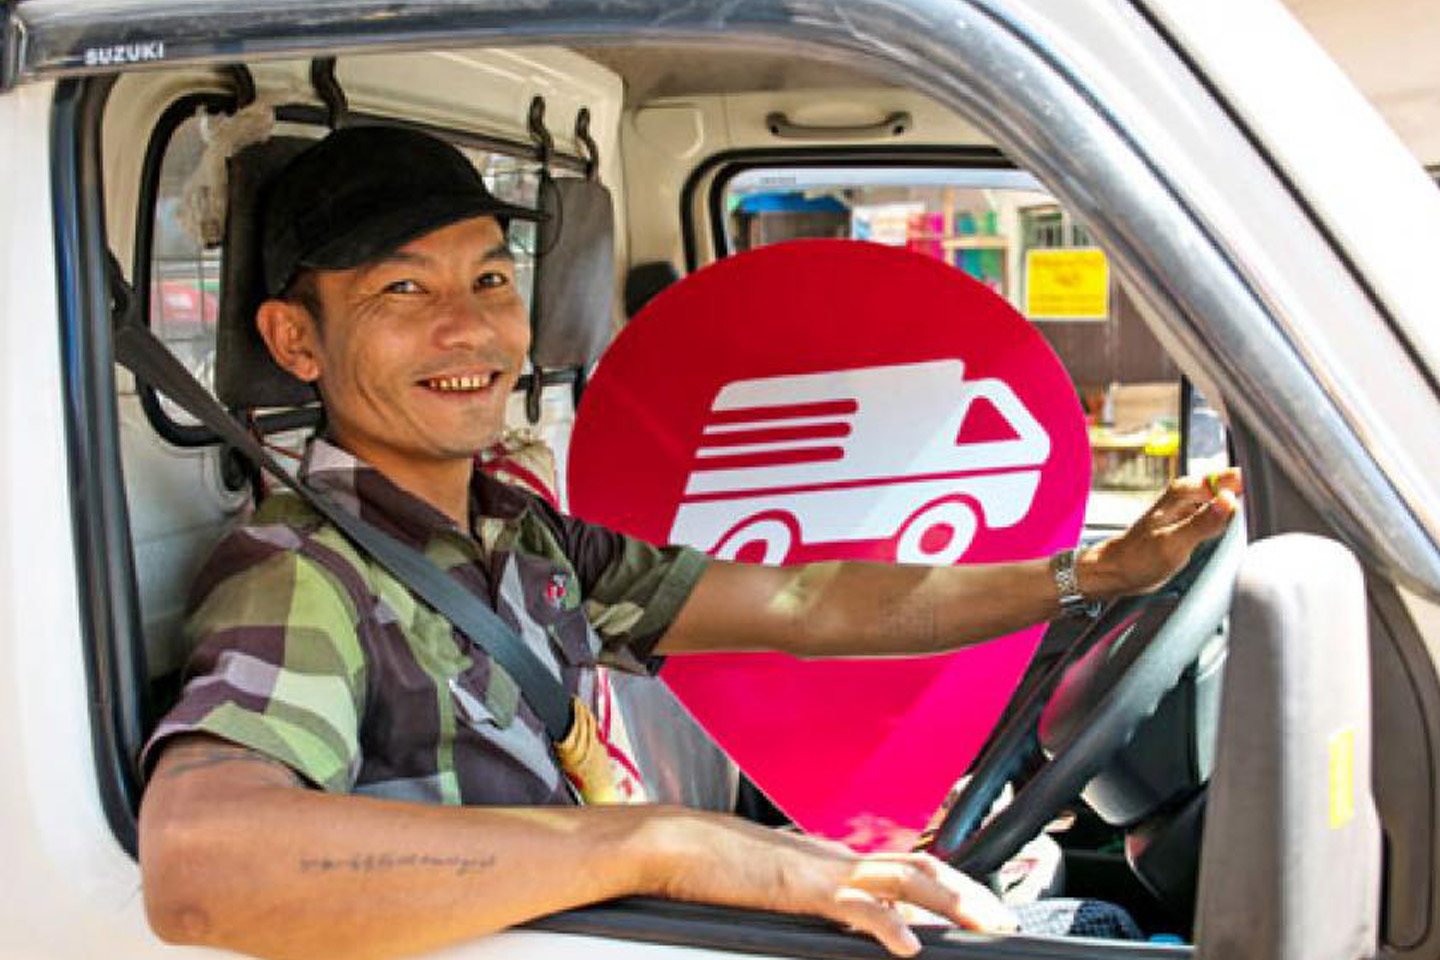 Shaking up the logistics industry by building a community of truck drivers